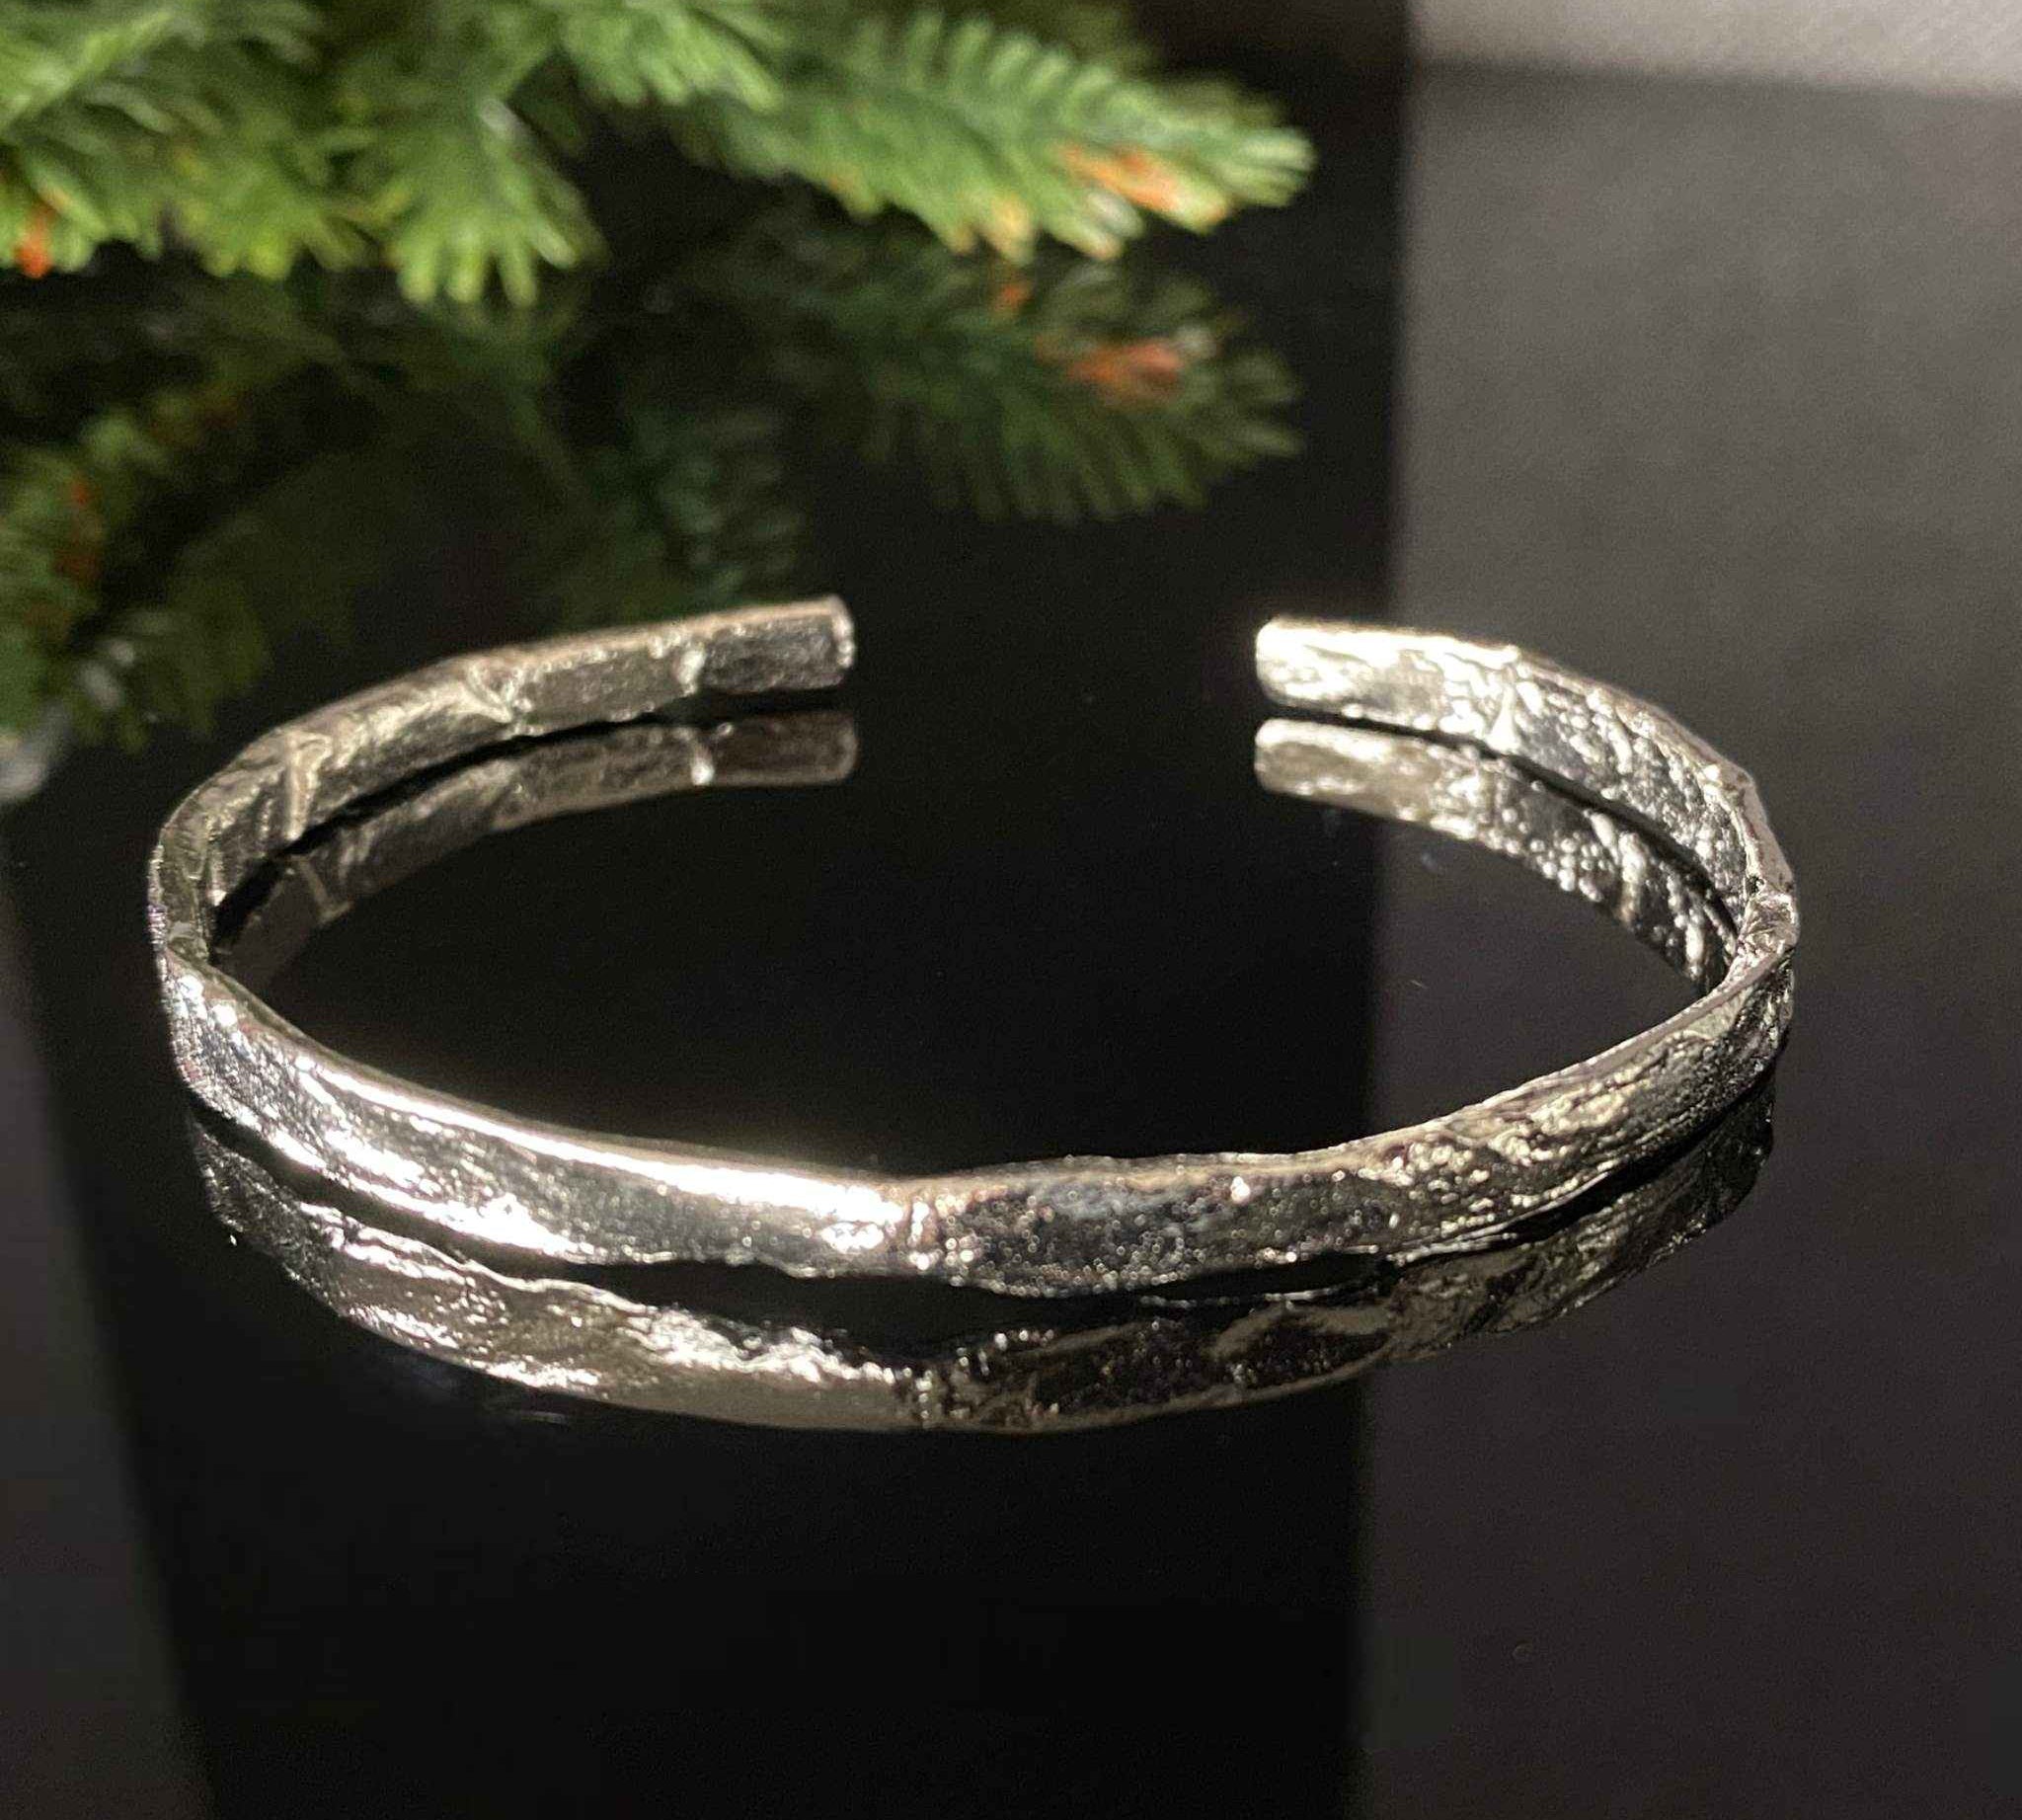 Close-up of the luxurious foil texture on the silver bangle for women.